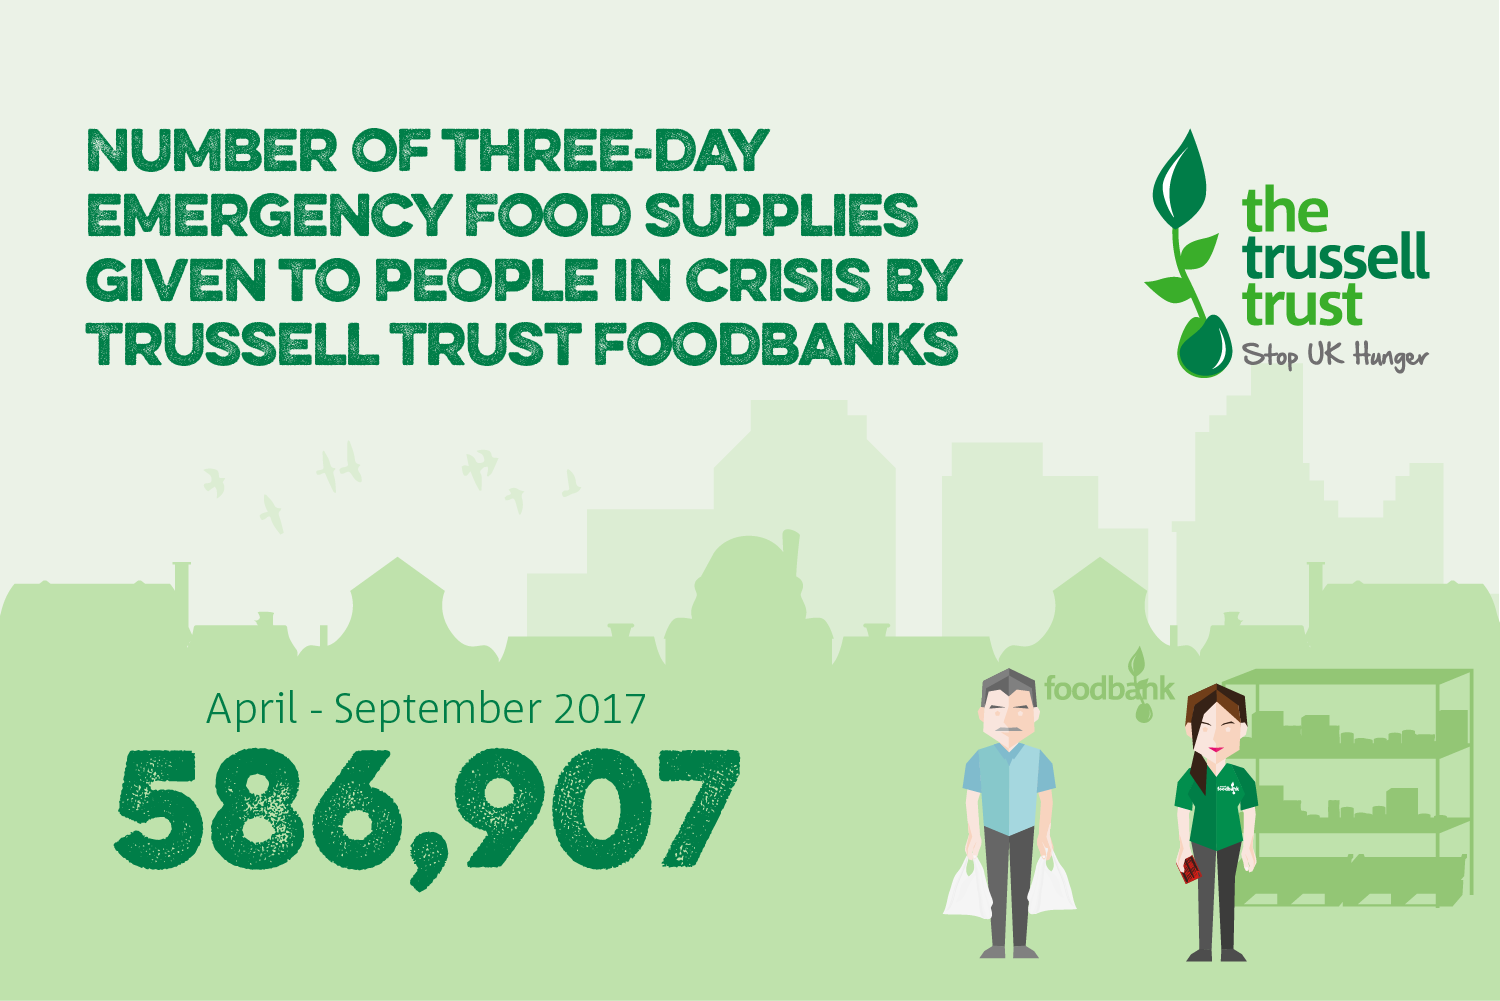 Demands For Food Banks On The Rise Across The UK Reports The Trussell